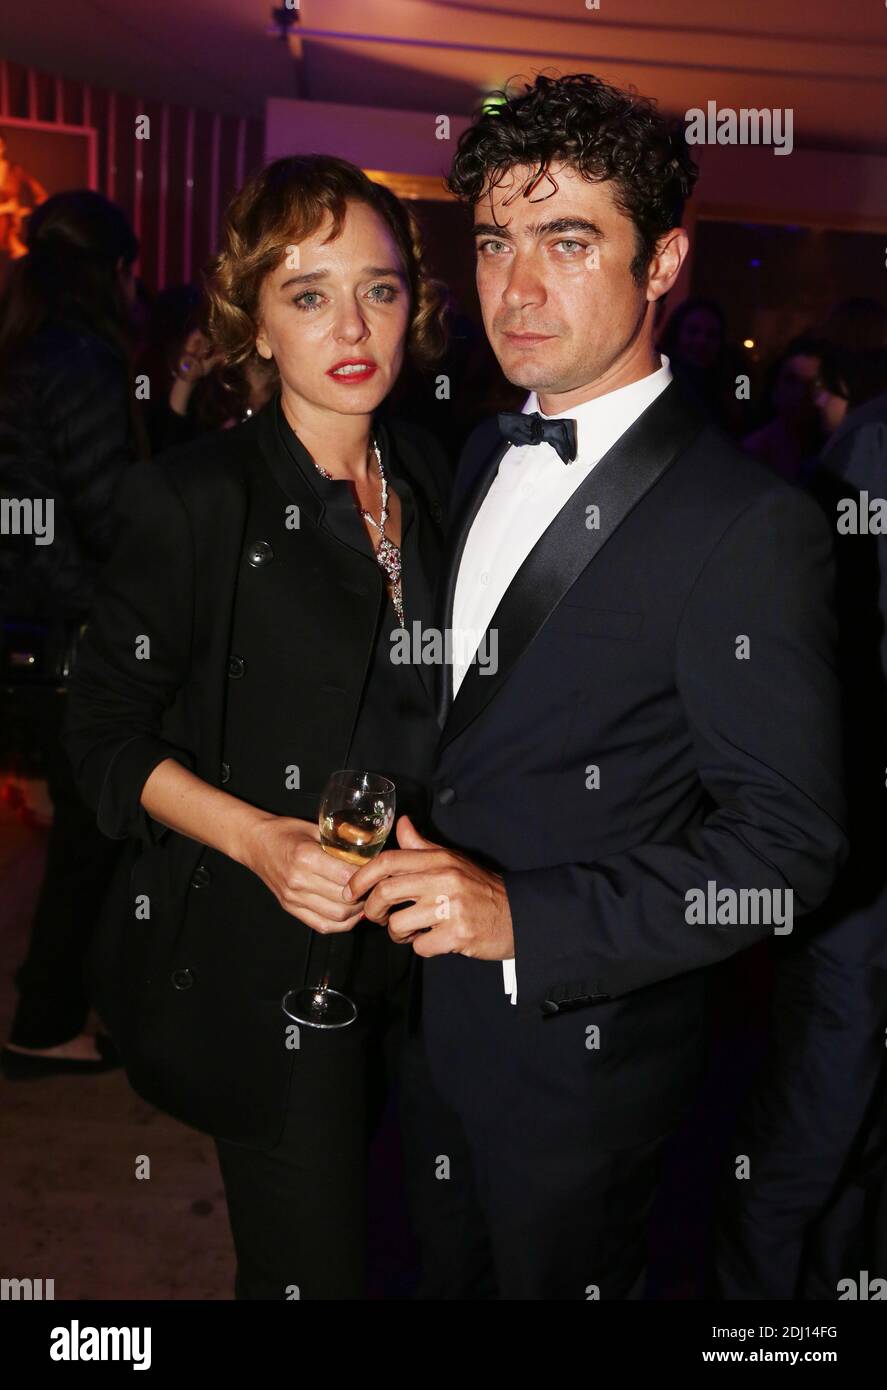 Valeria Golino and her husband Riccardo Scamarcio attending Pericle il Nero after party during the 69th annual Cannes Film Festival on May 19, 2016 in Cannes, France. Photo by Jerome Domine/ABACAPRESS.COM Stock Photo